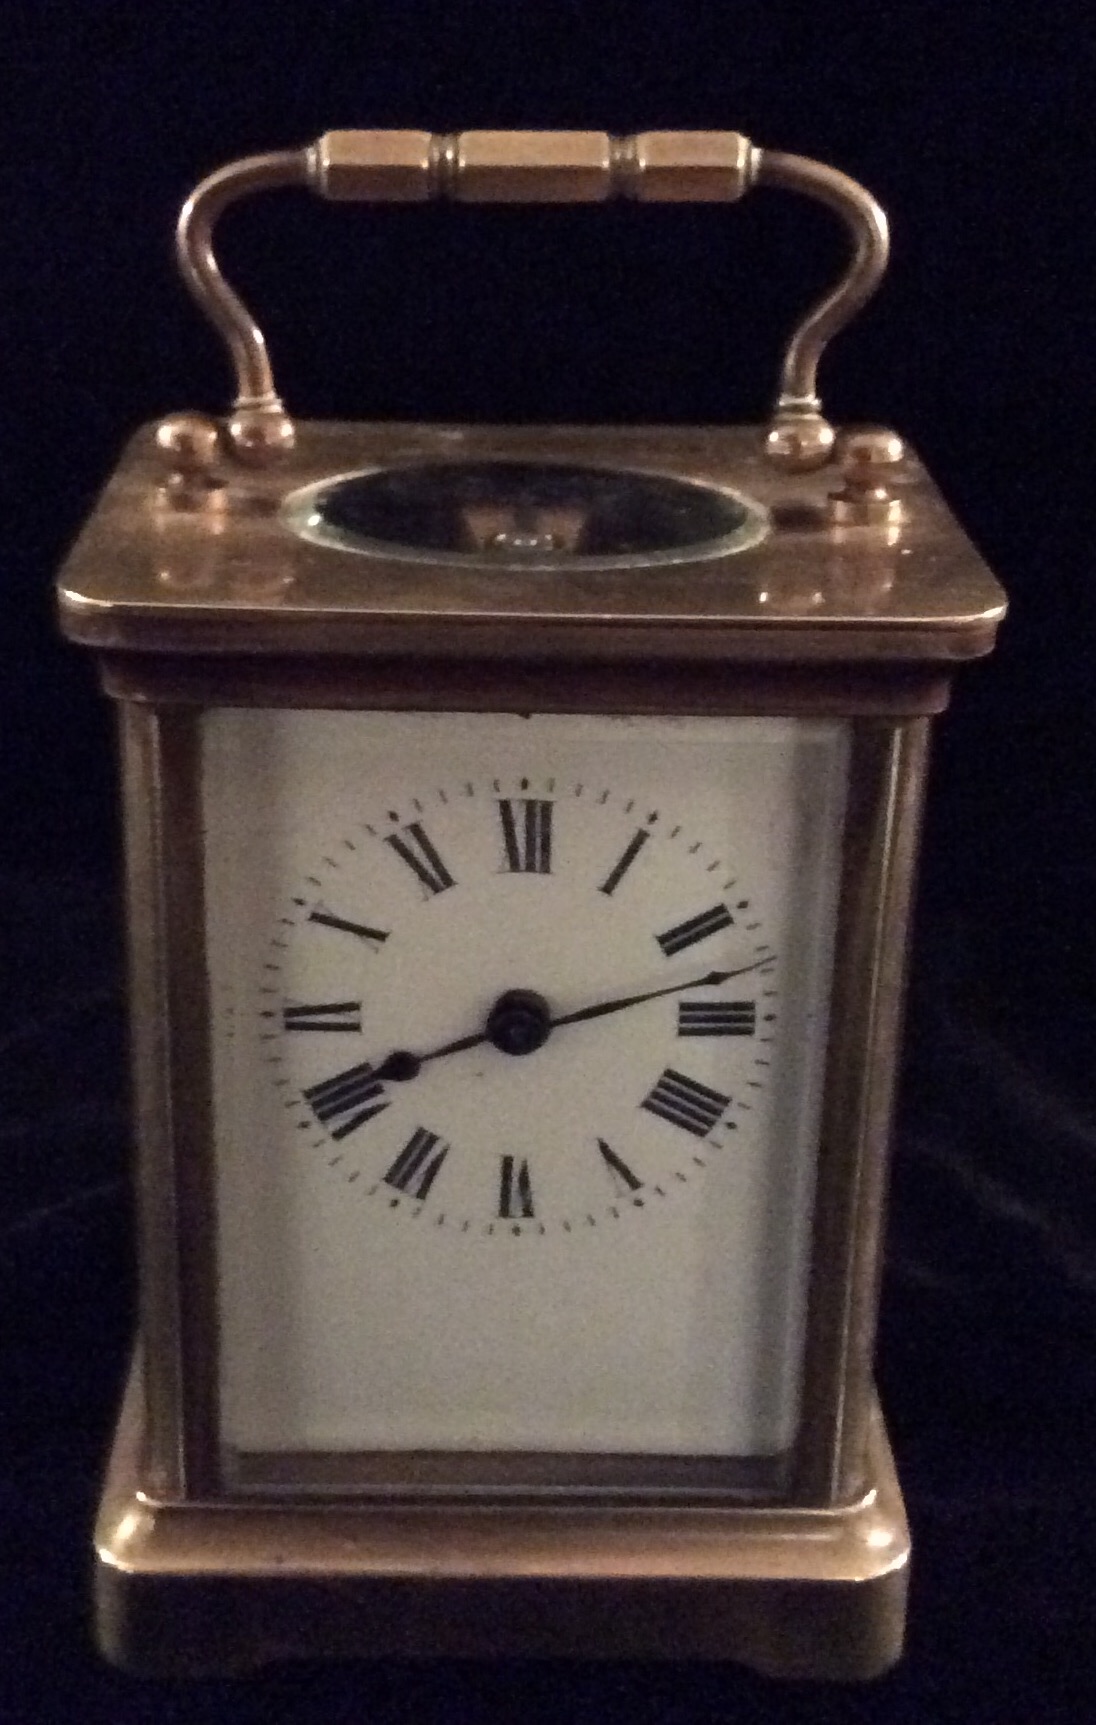 HARRODS LTD LONDON a late 19th century gilt brass carriage clock with swan neck handle, oval